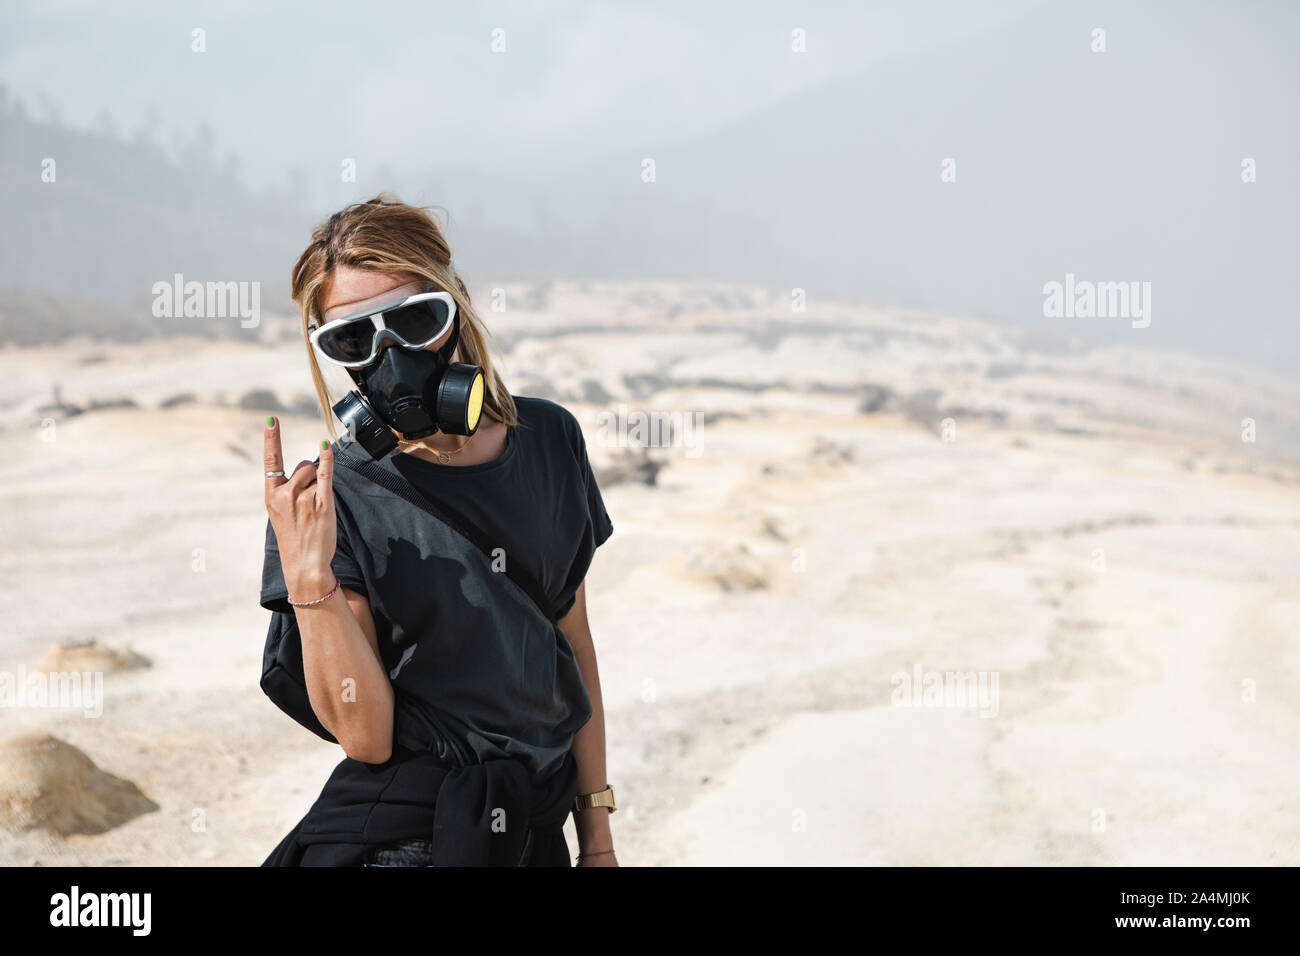 Young women in protective mask walking by wastelands around Kawah Ijen volcano crater. Post apocalypse landscape with clouds of toxic gases. Stock Photo